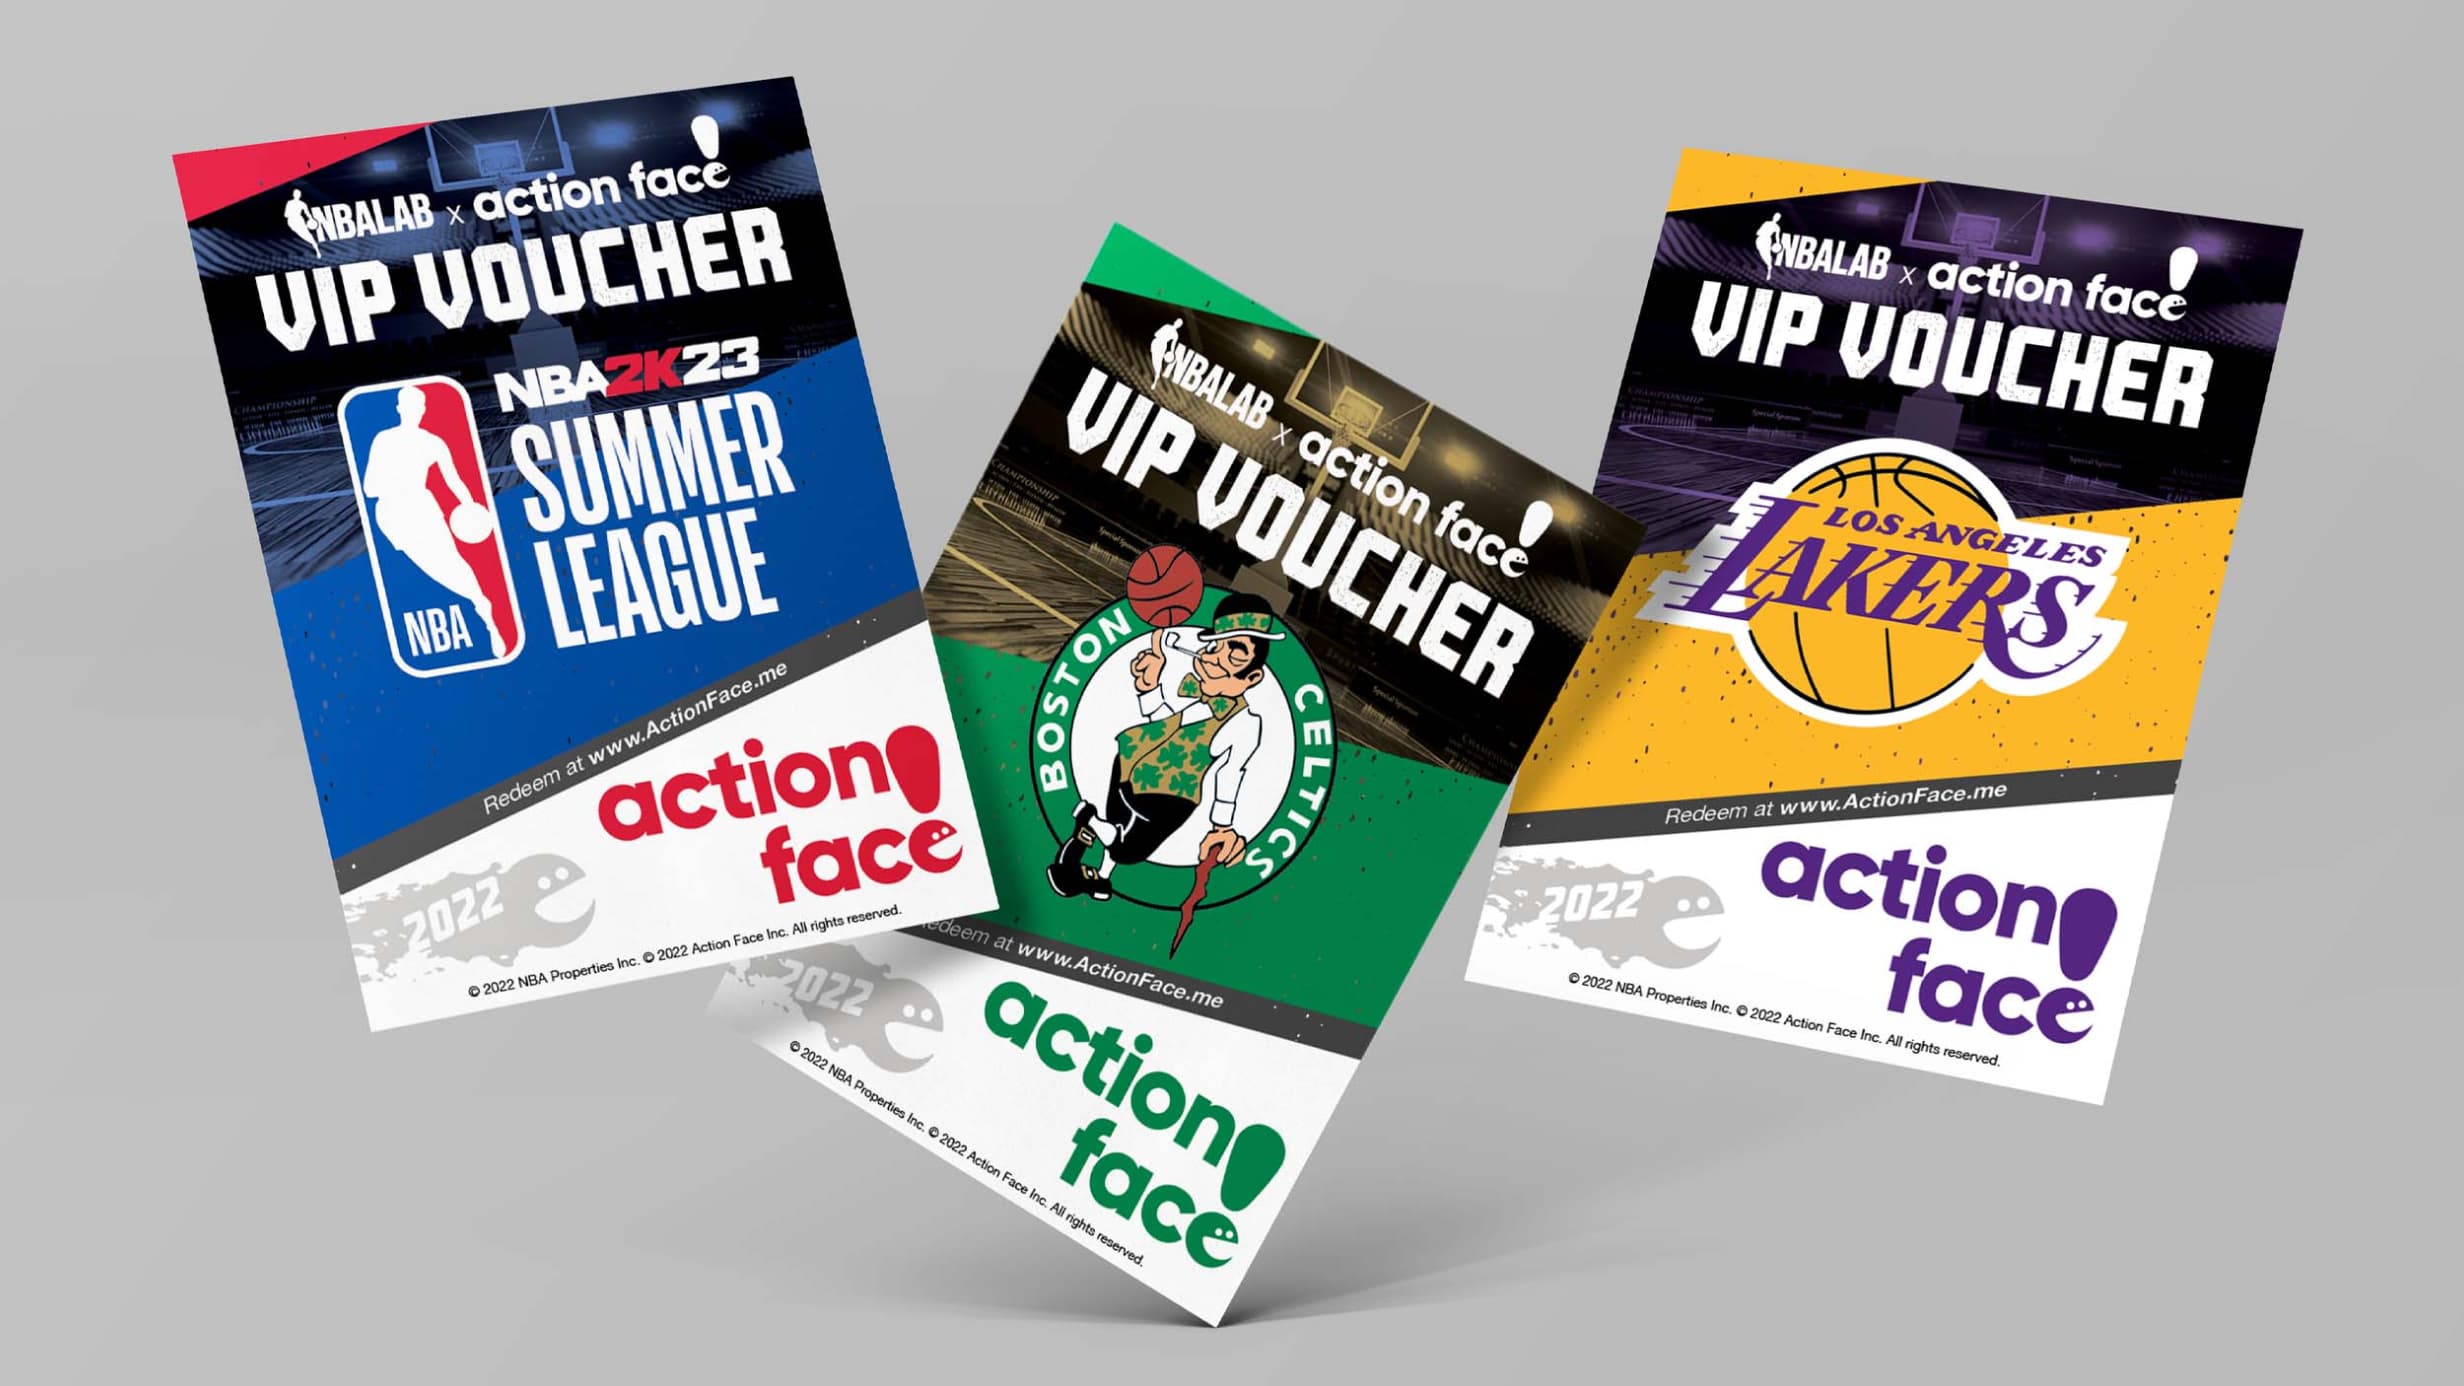 Showcase of action face print collateral